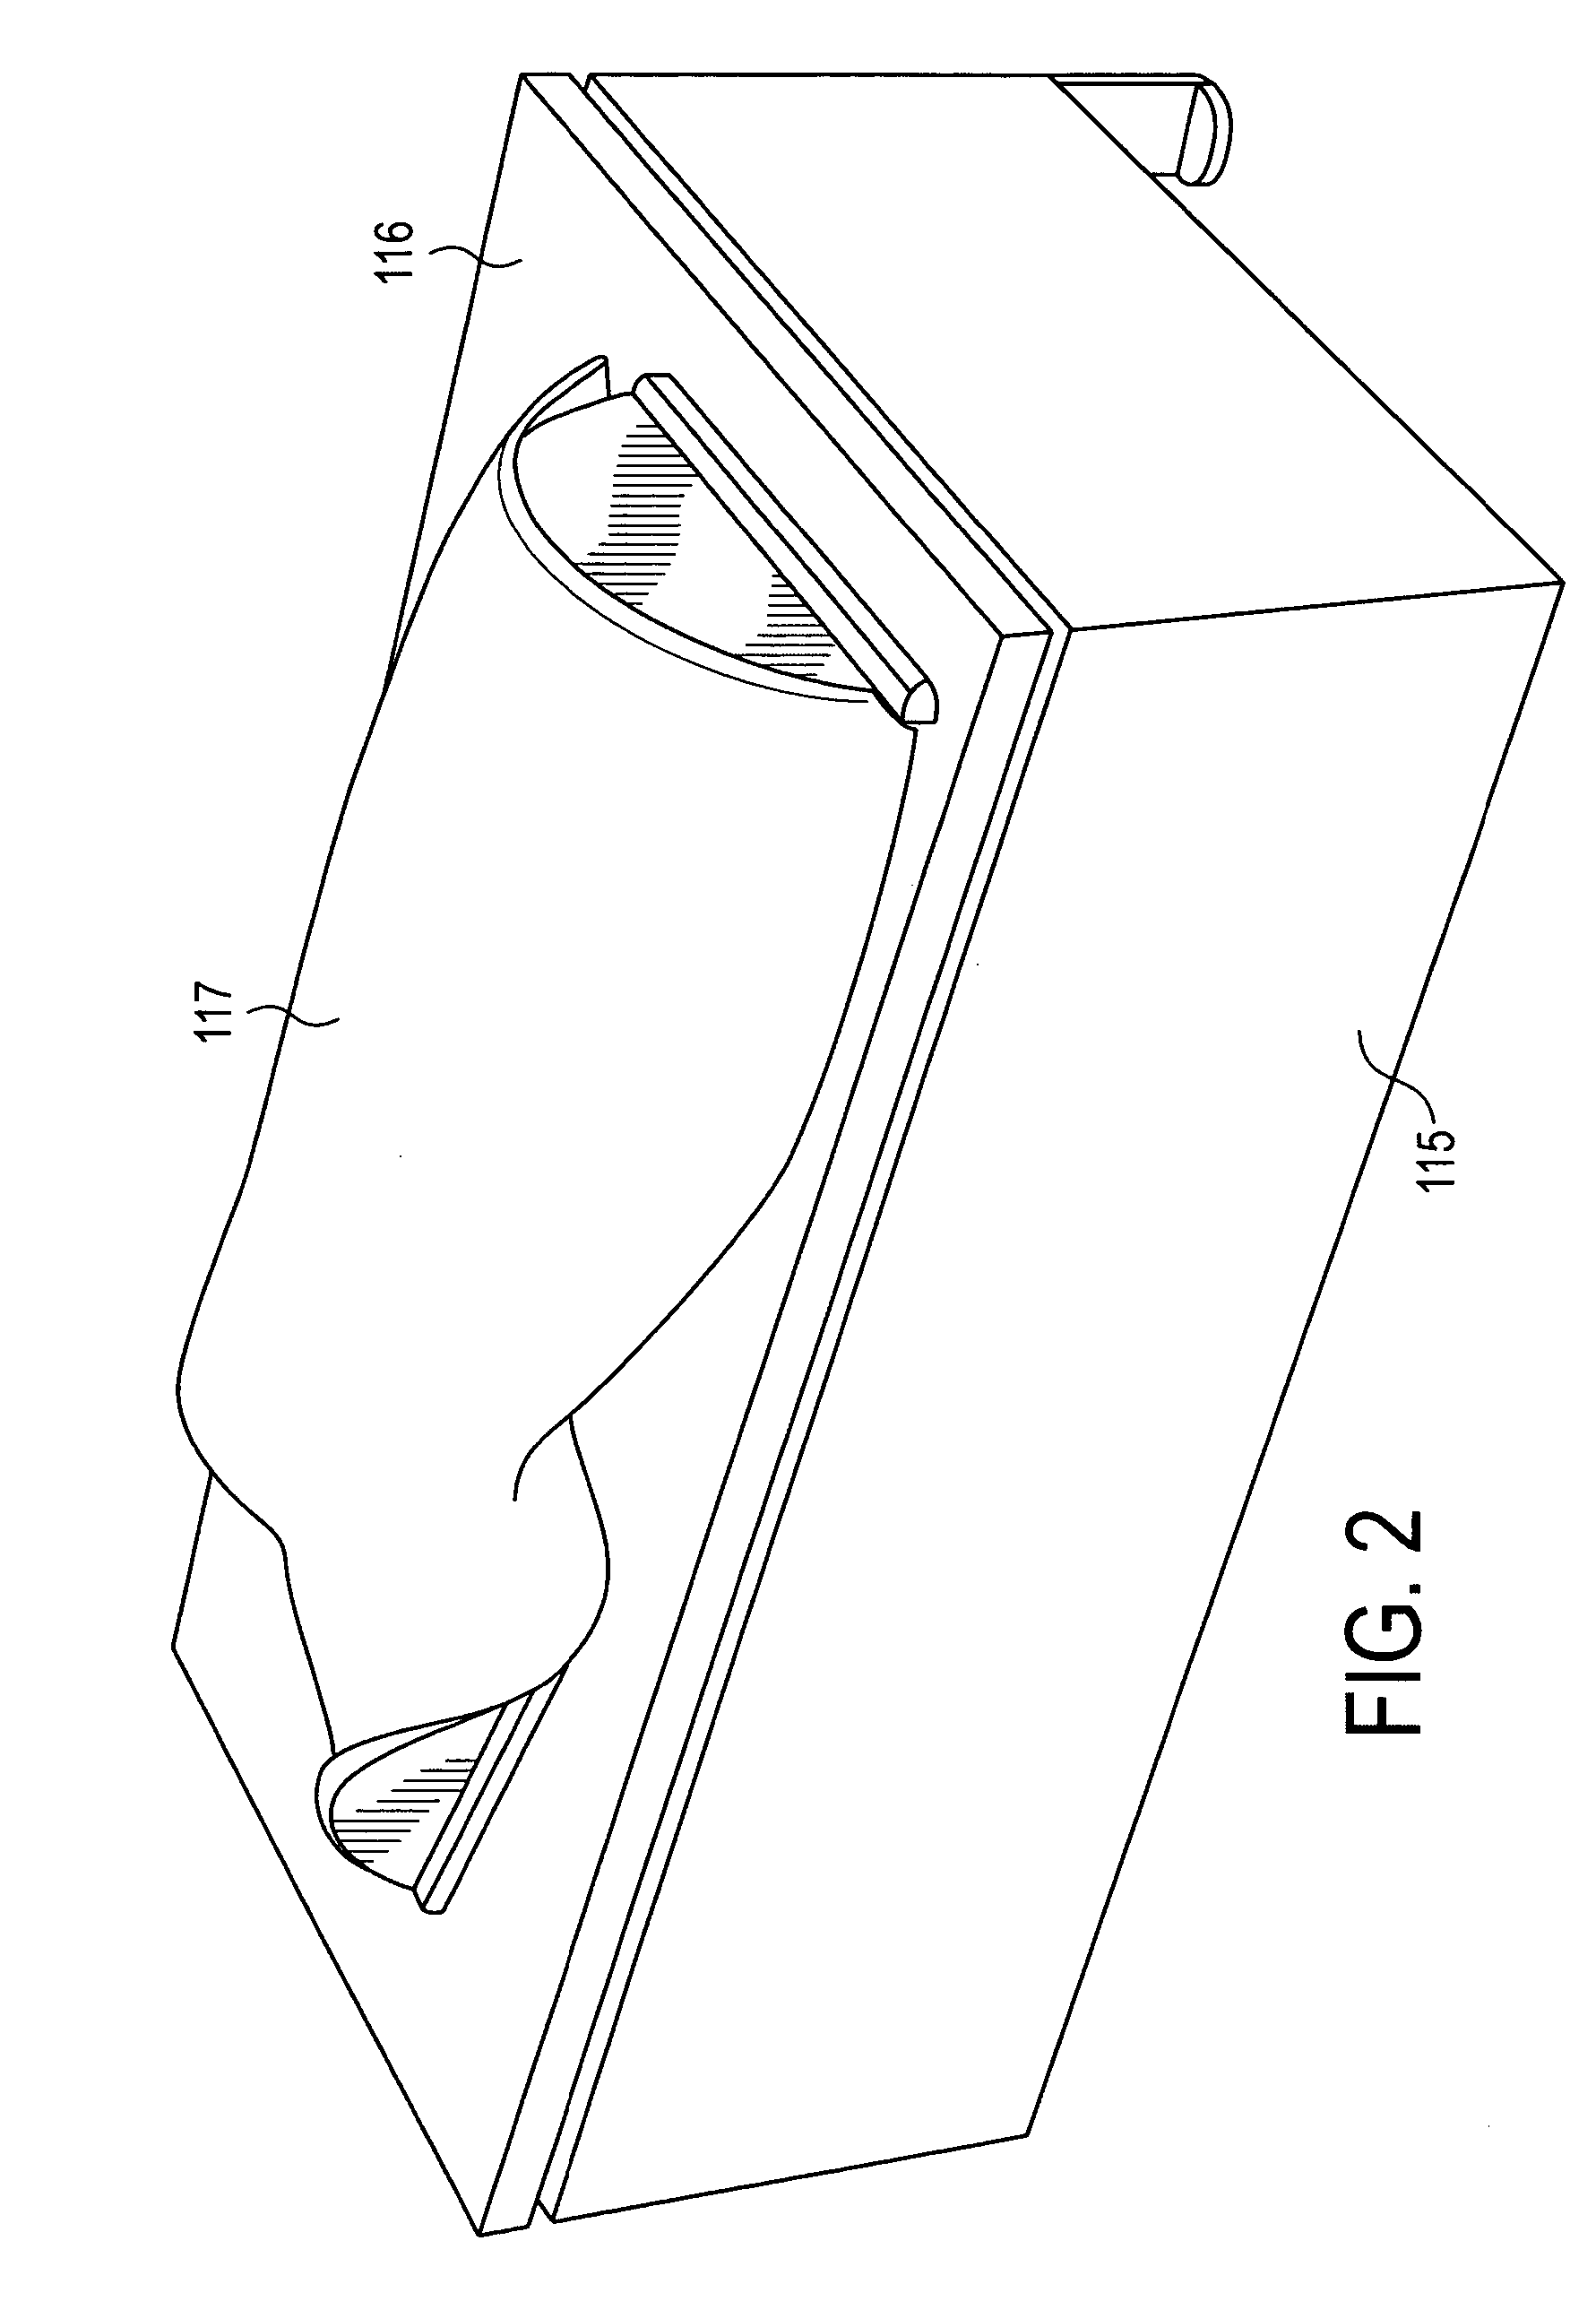 Methods and apparatus for Palpation Simulation